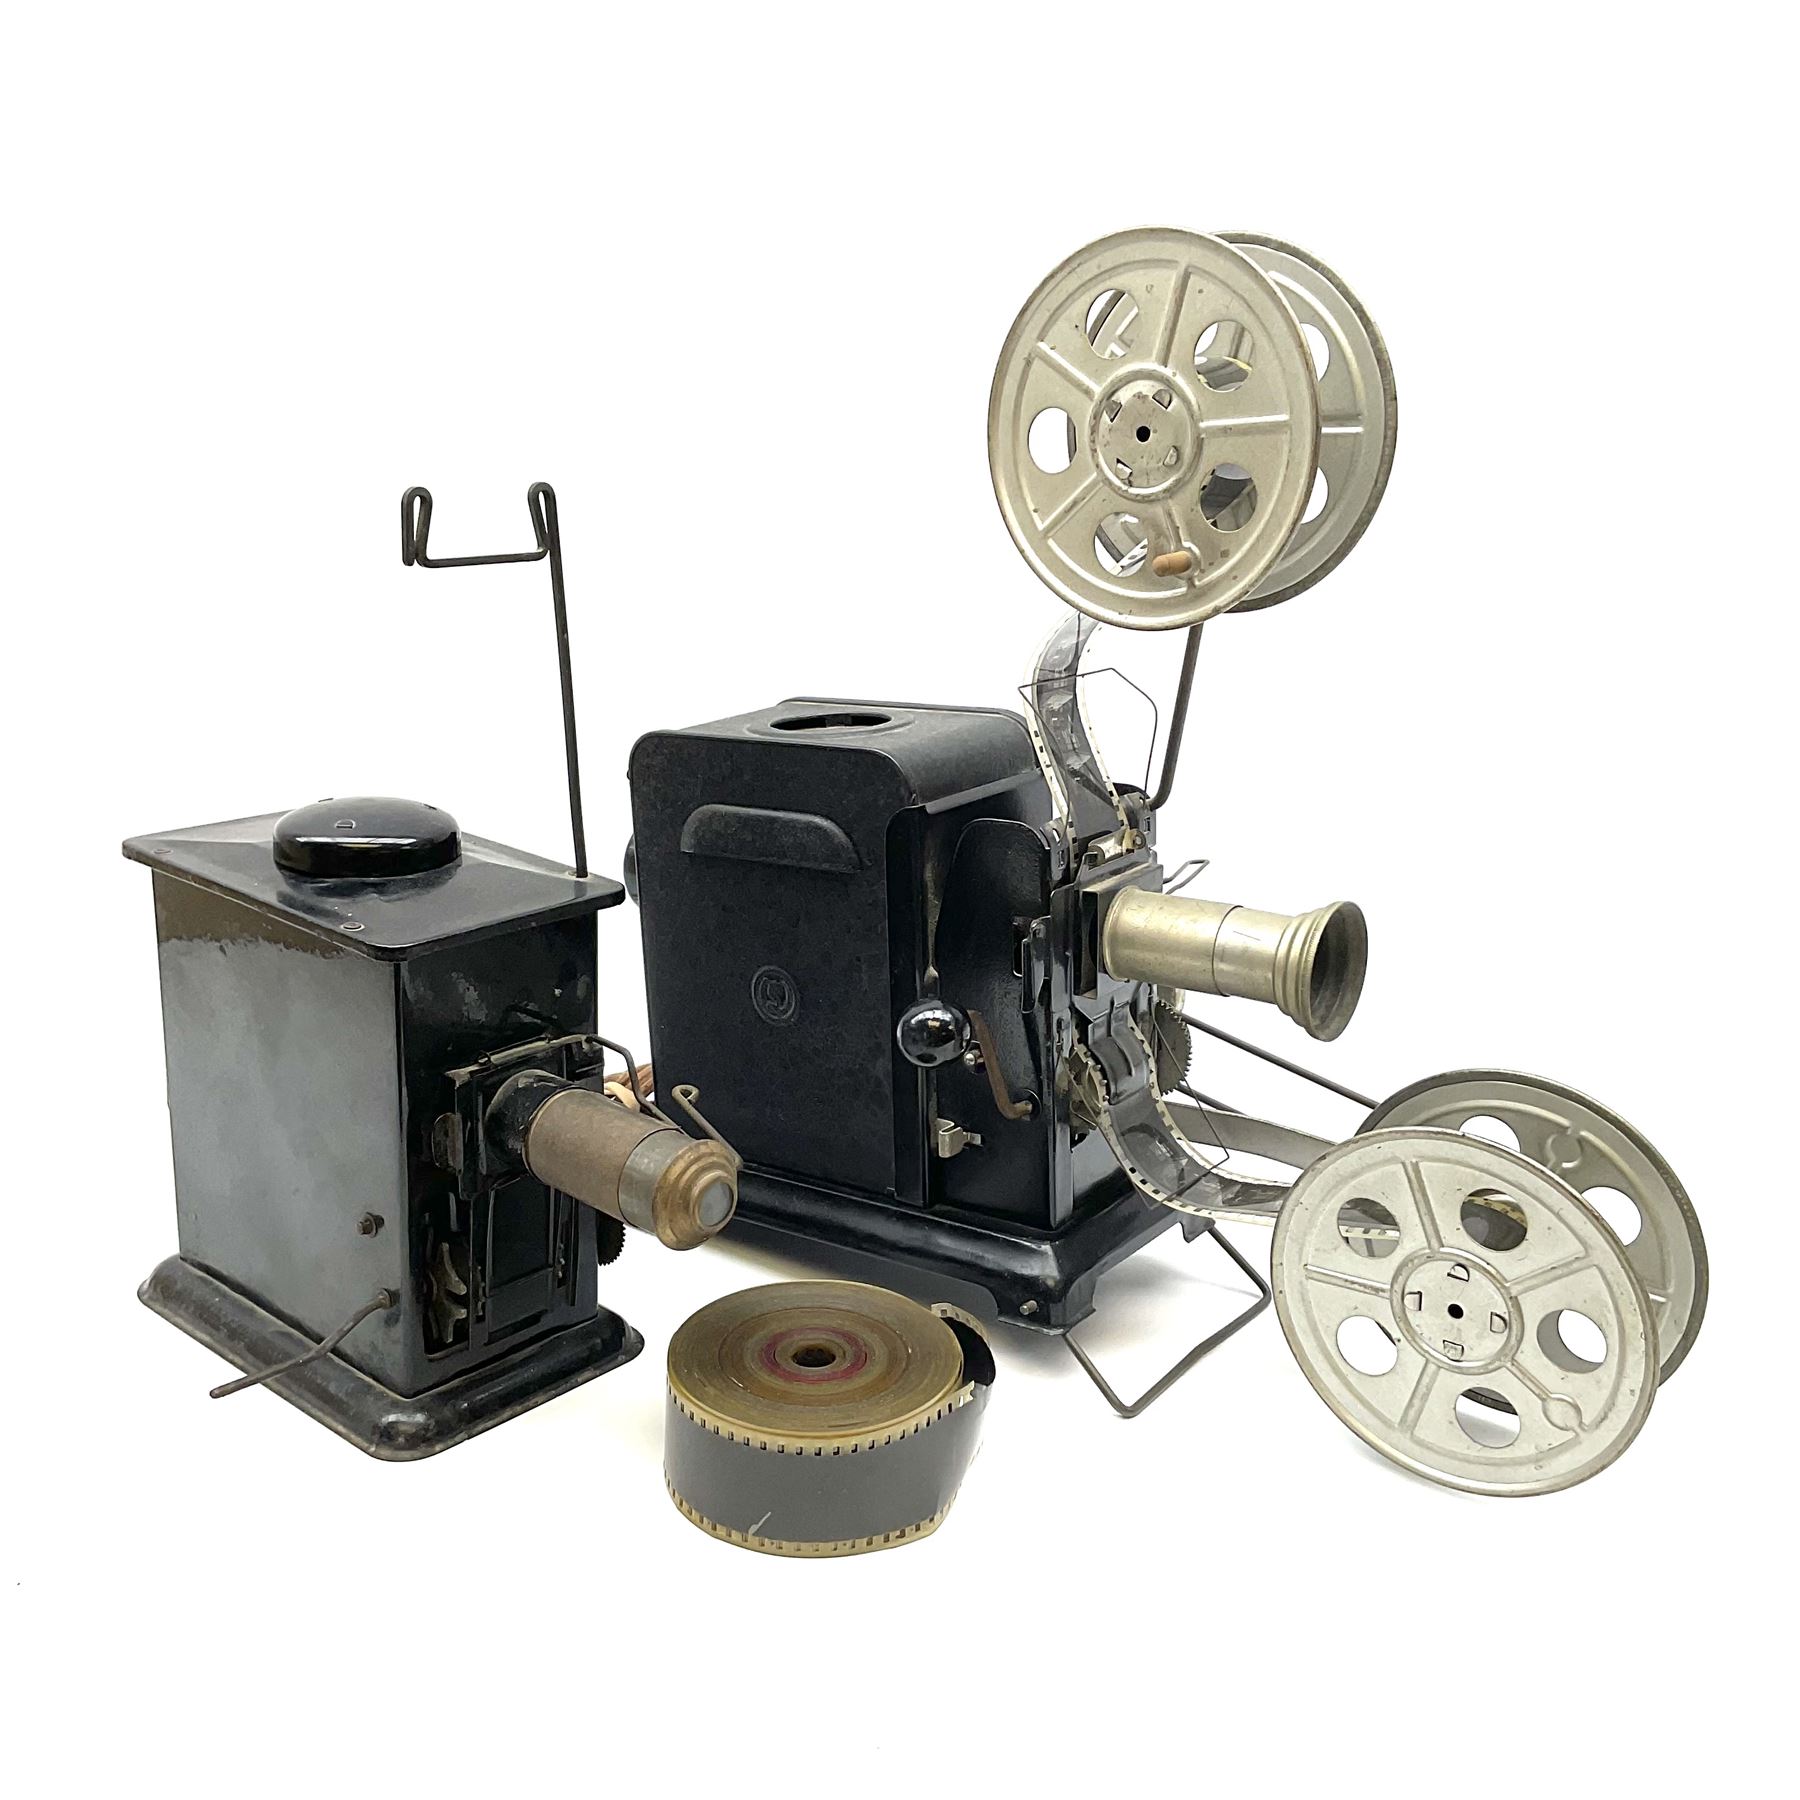 Early 20th century tinplate combined magic lantern and 35mm